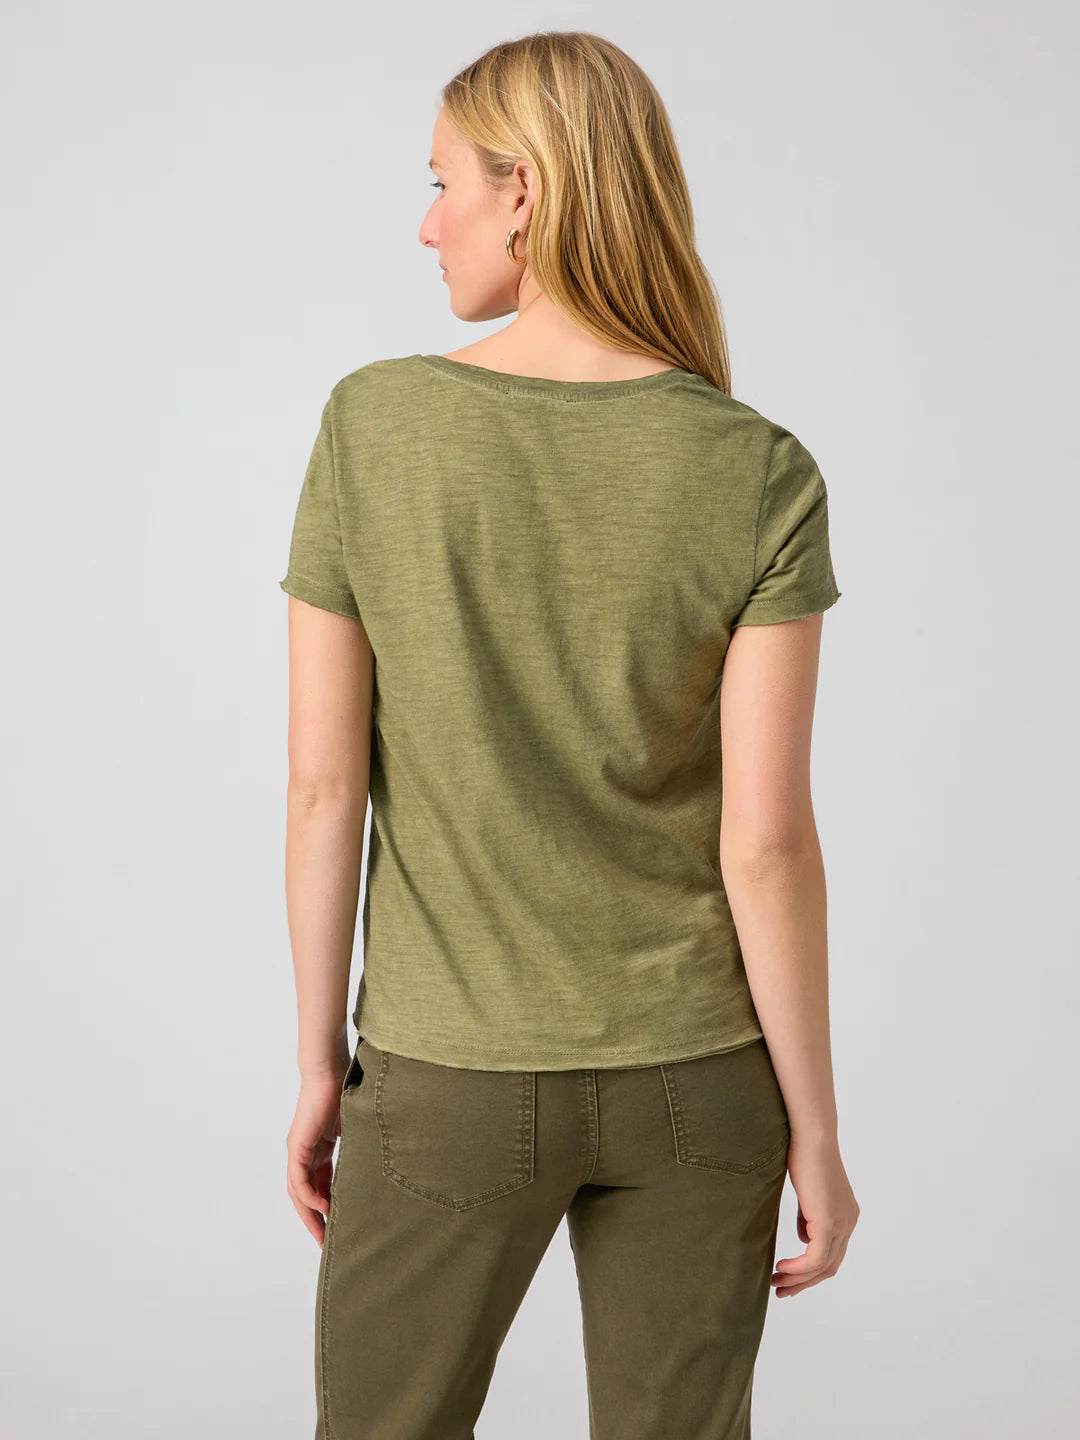 Sanctuary Carefree Tee in Burnt Olive